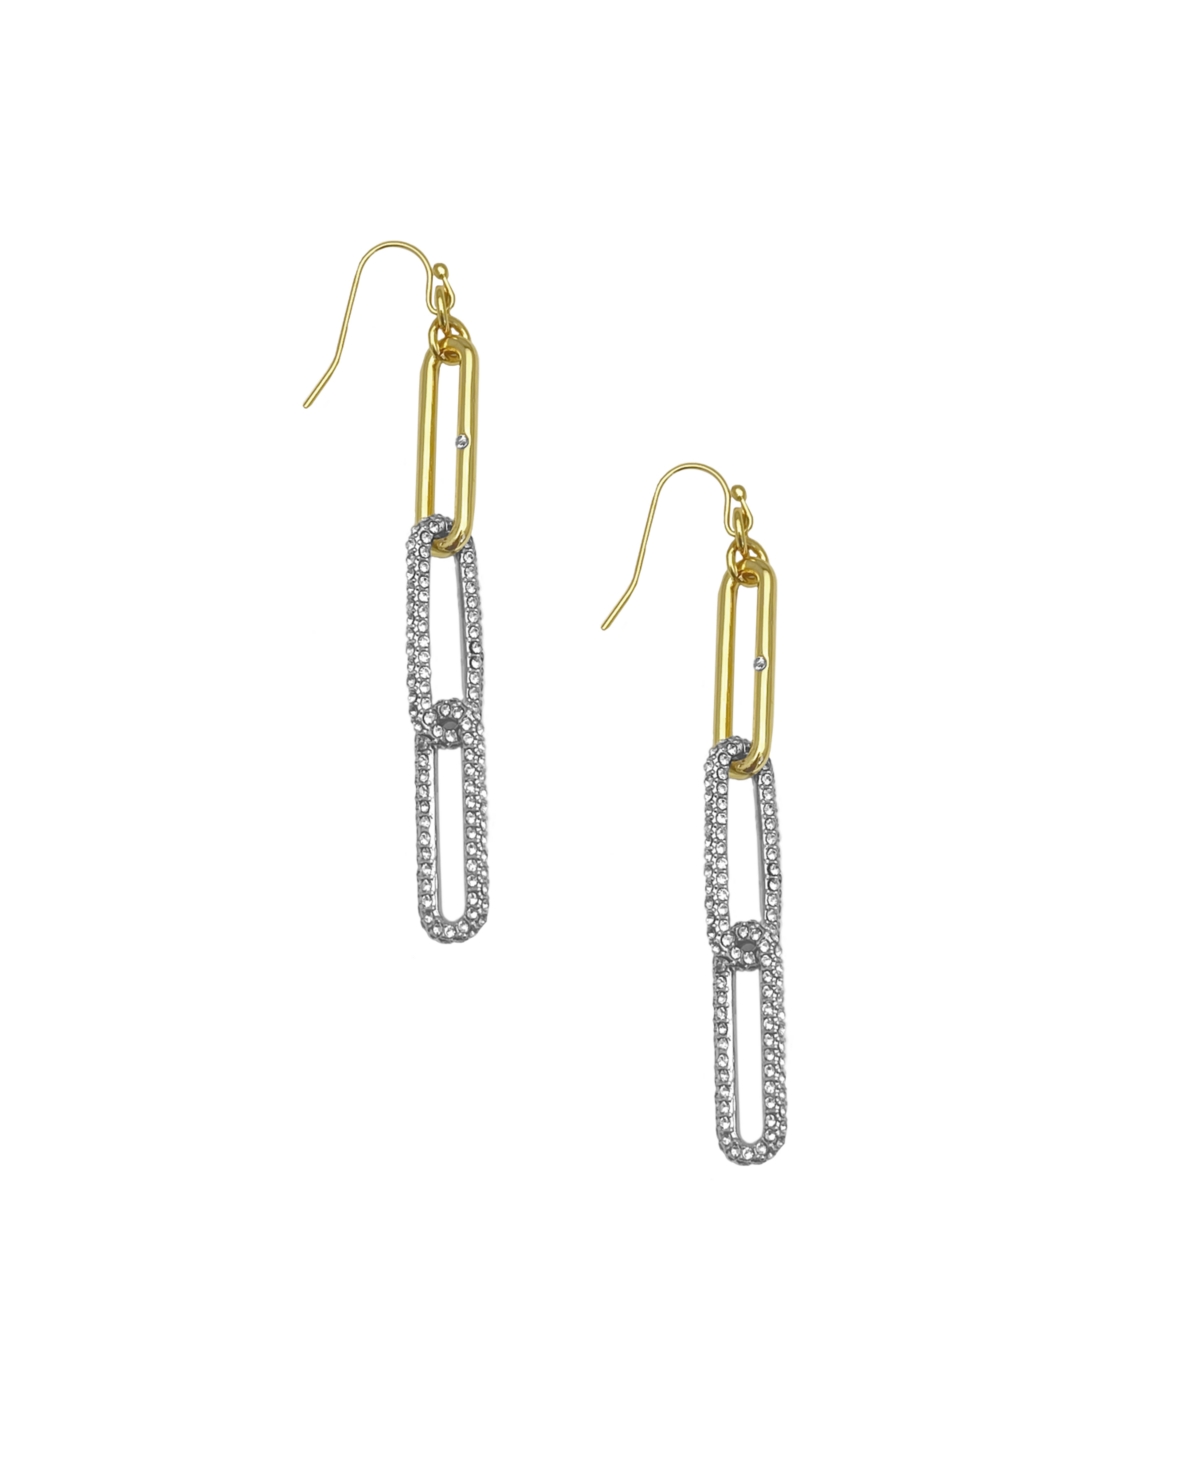 Two-Tone Glass Stone Paper Clip Fish Hook Drop Earrings - Gold-Tone